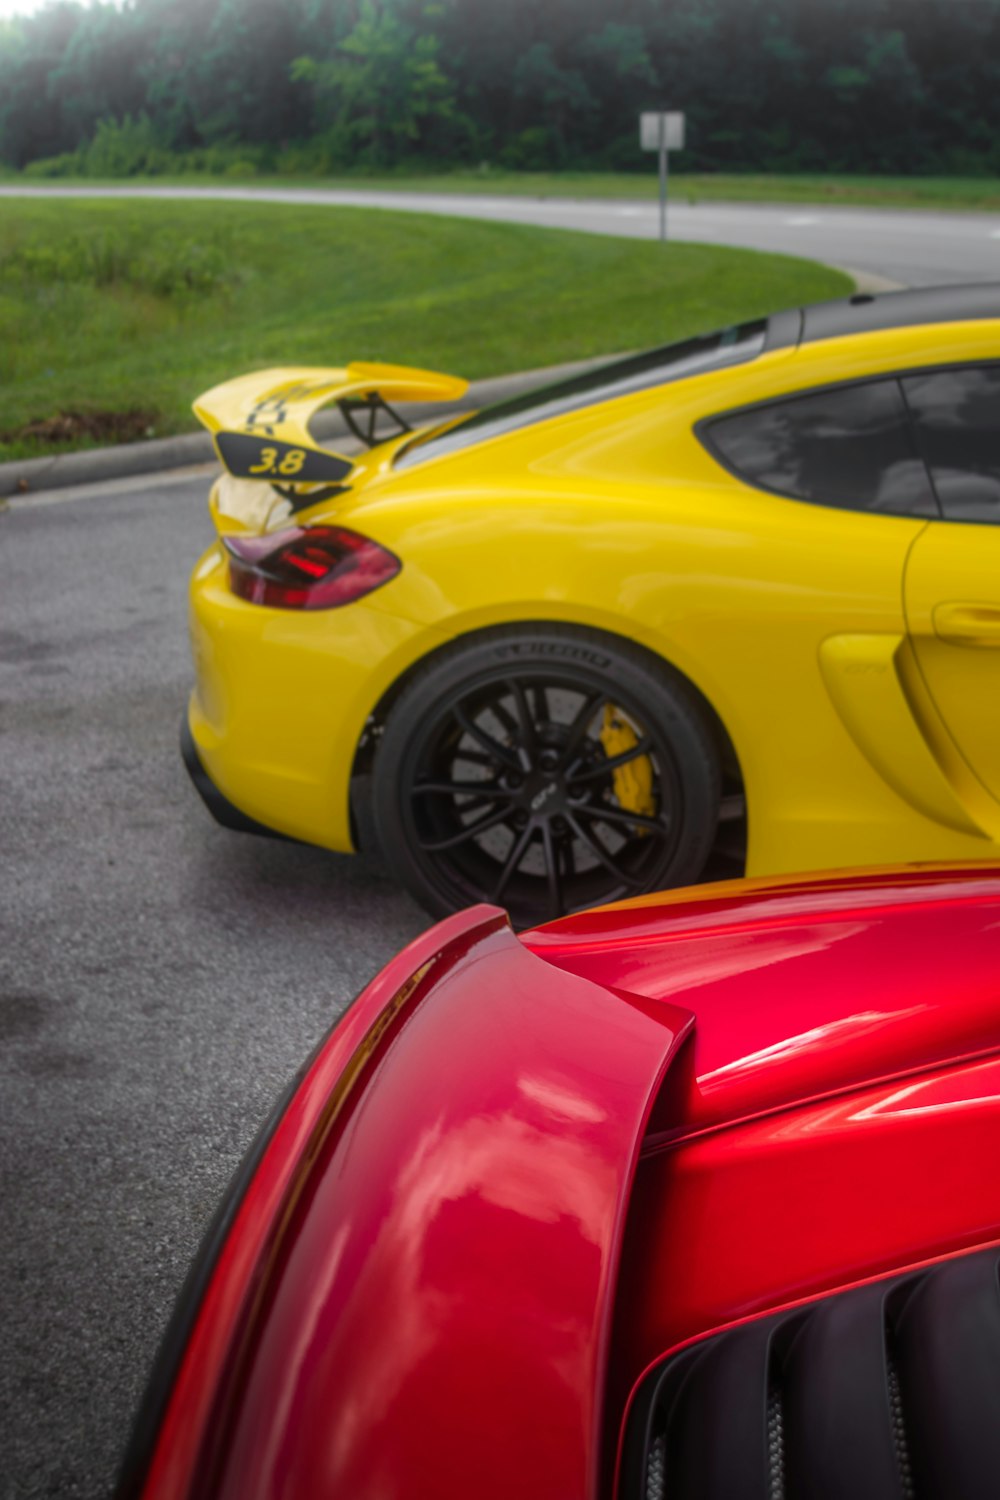 a yellow sports car parked next to a red sports car